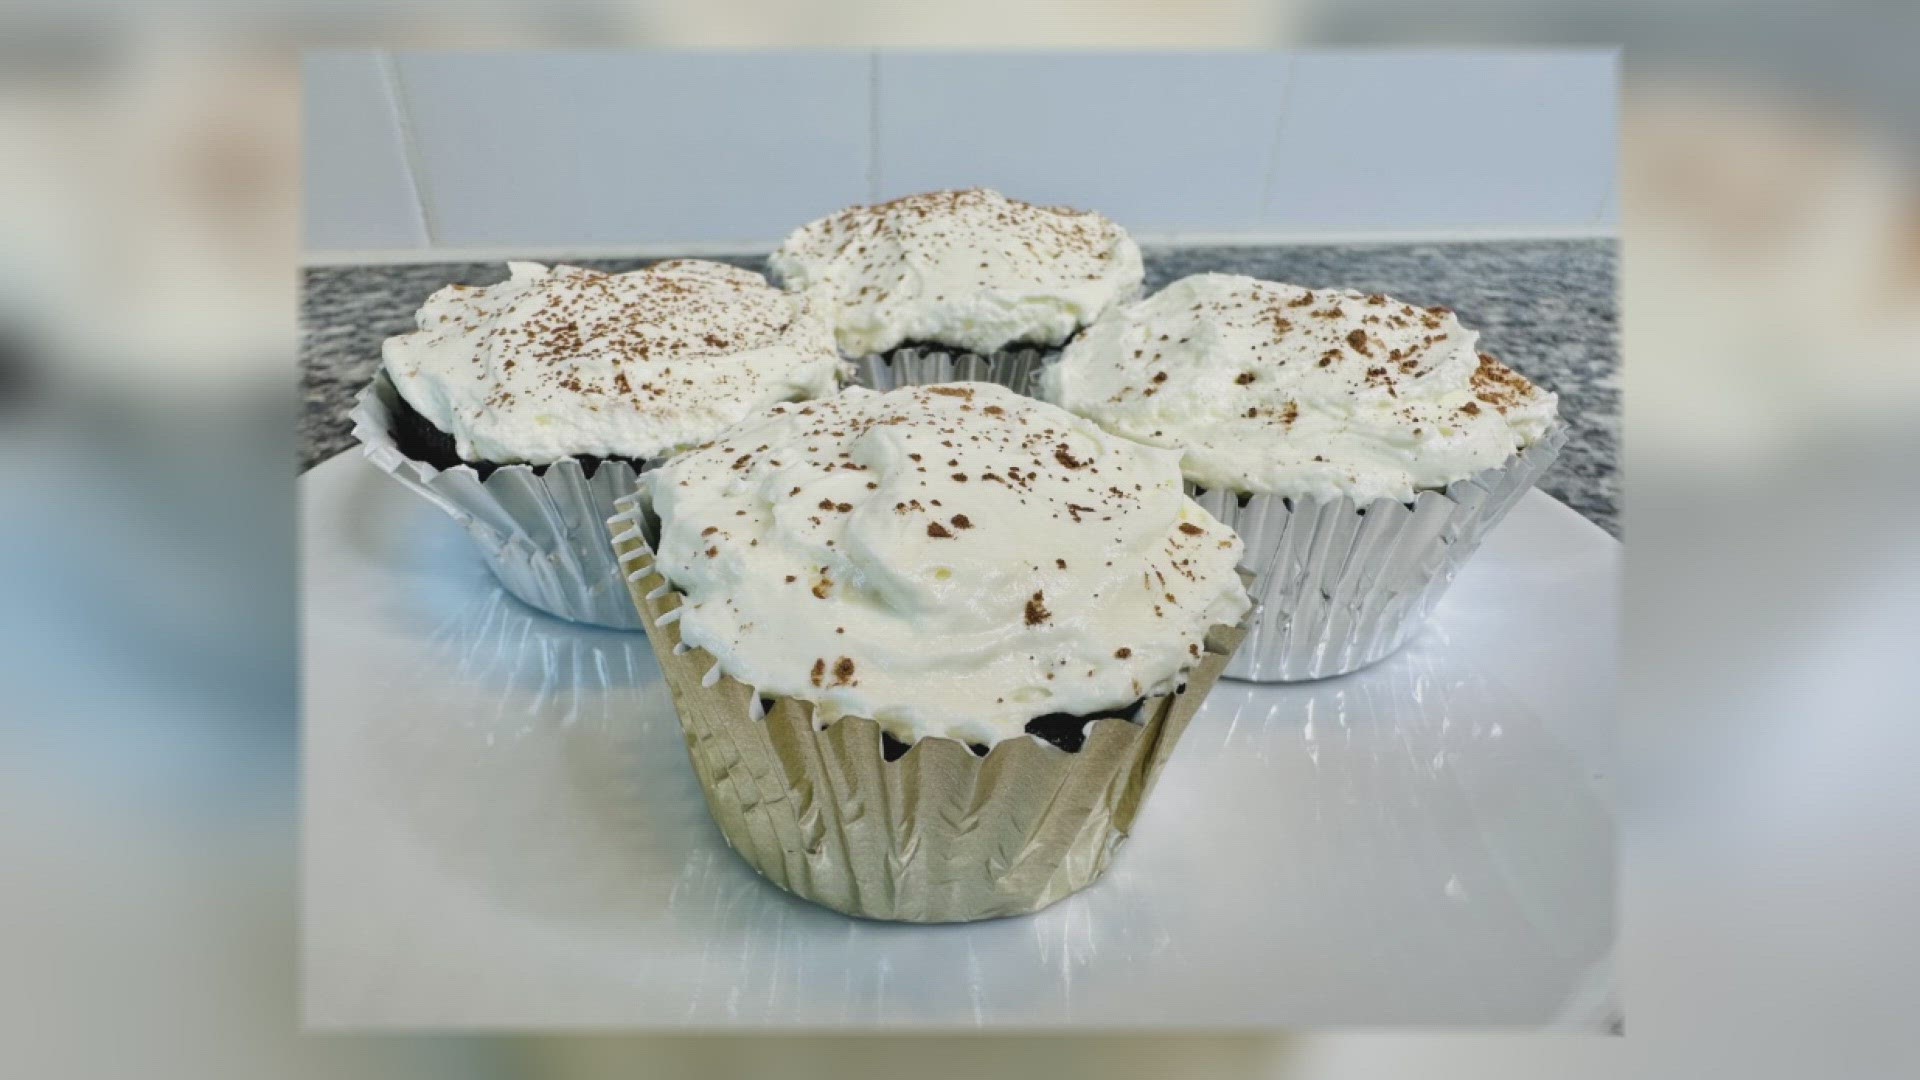 Need a cupcake recipe that makes you feel like you're at a coffee shop? This week's Brittany's Bites recipe puts a caffeinated spin on a classic dessert.